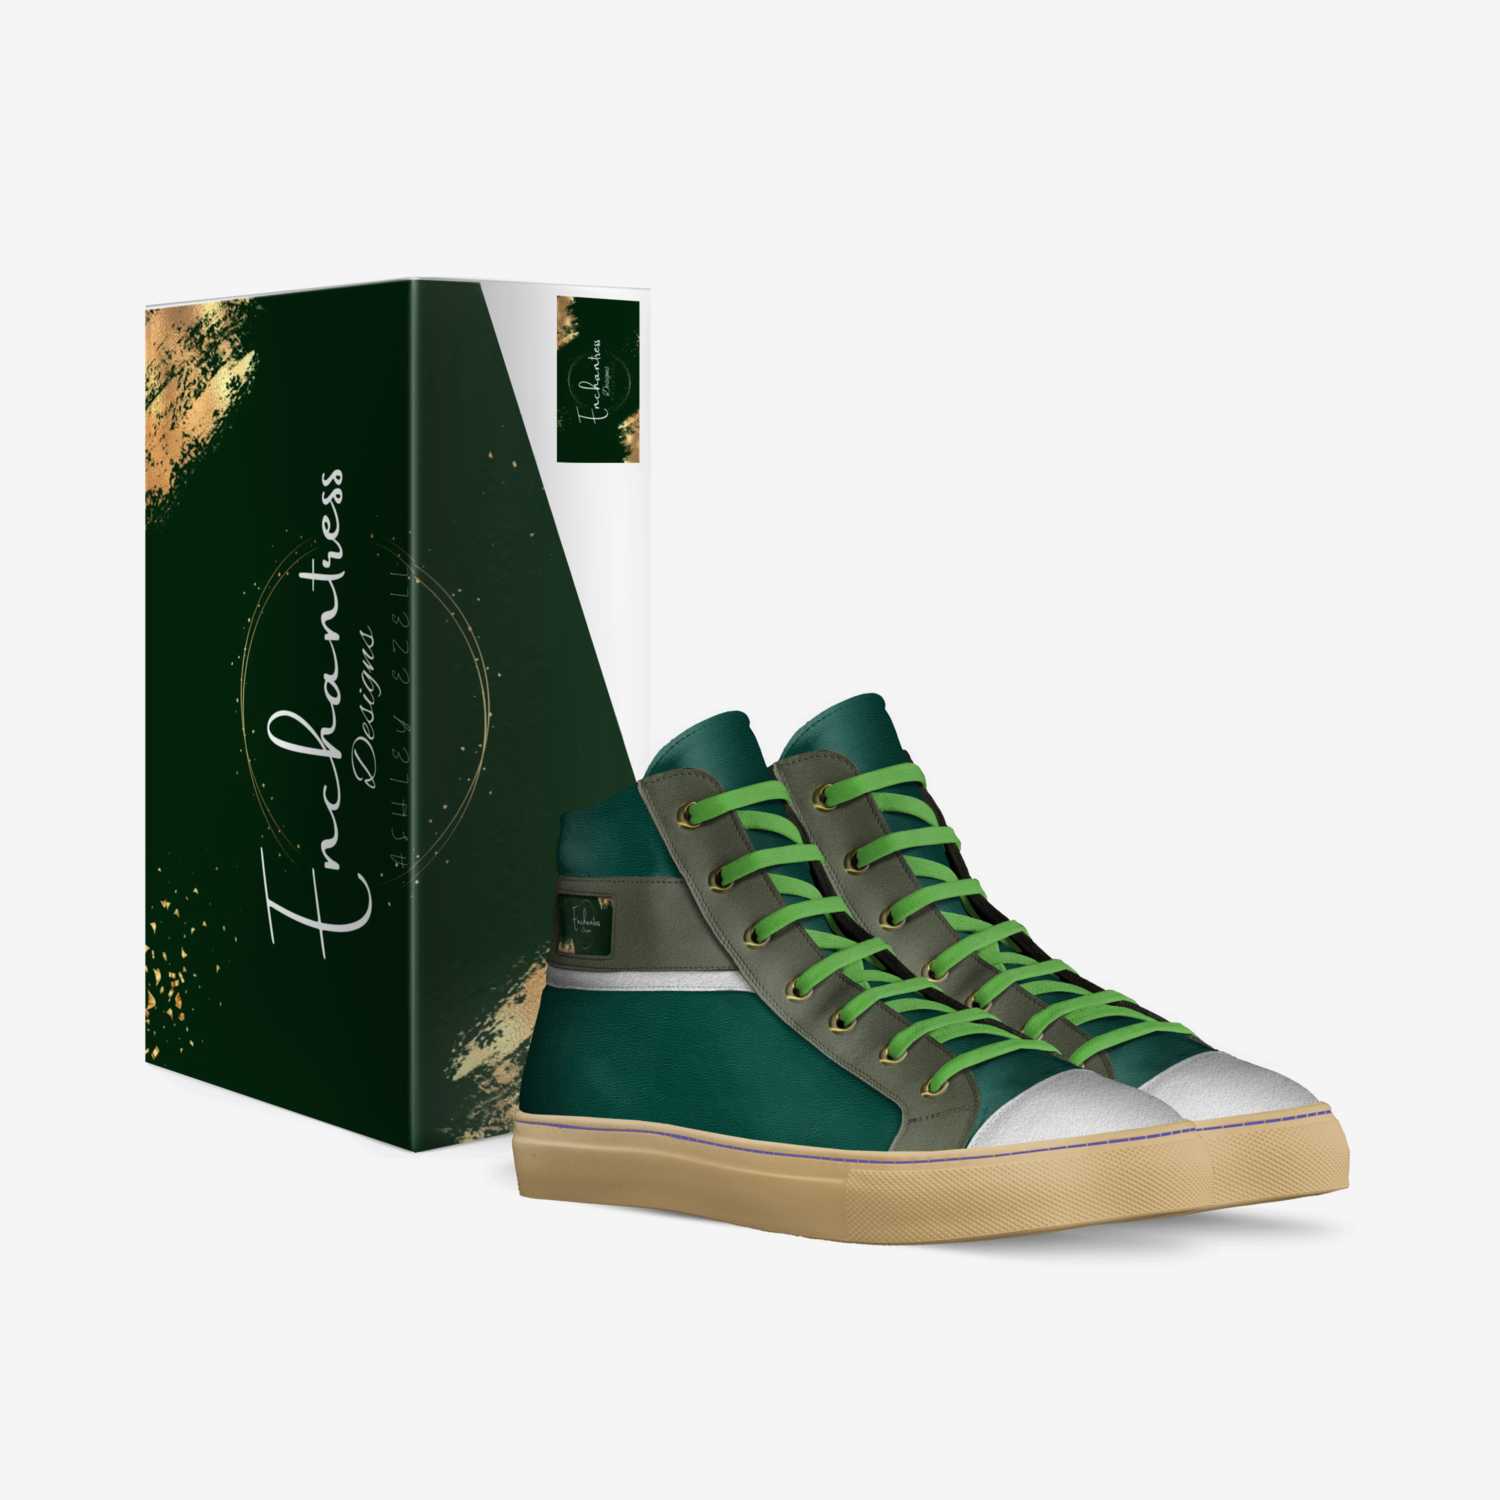 Seeing Green custom made in Italy shoes by Ashley Ezell | Box view